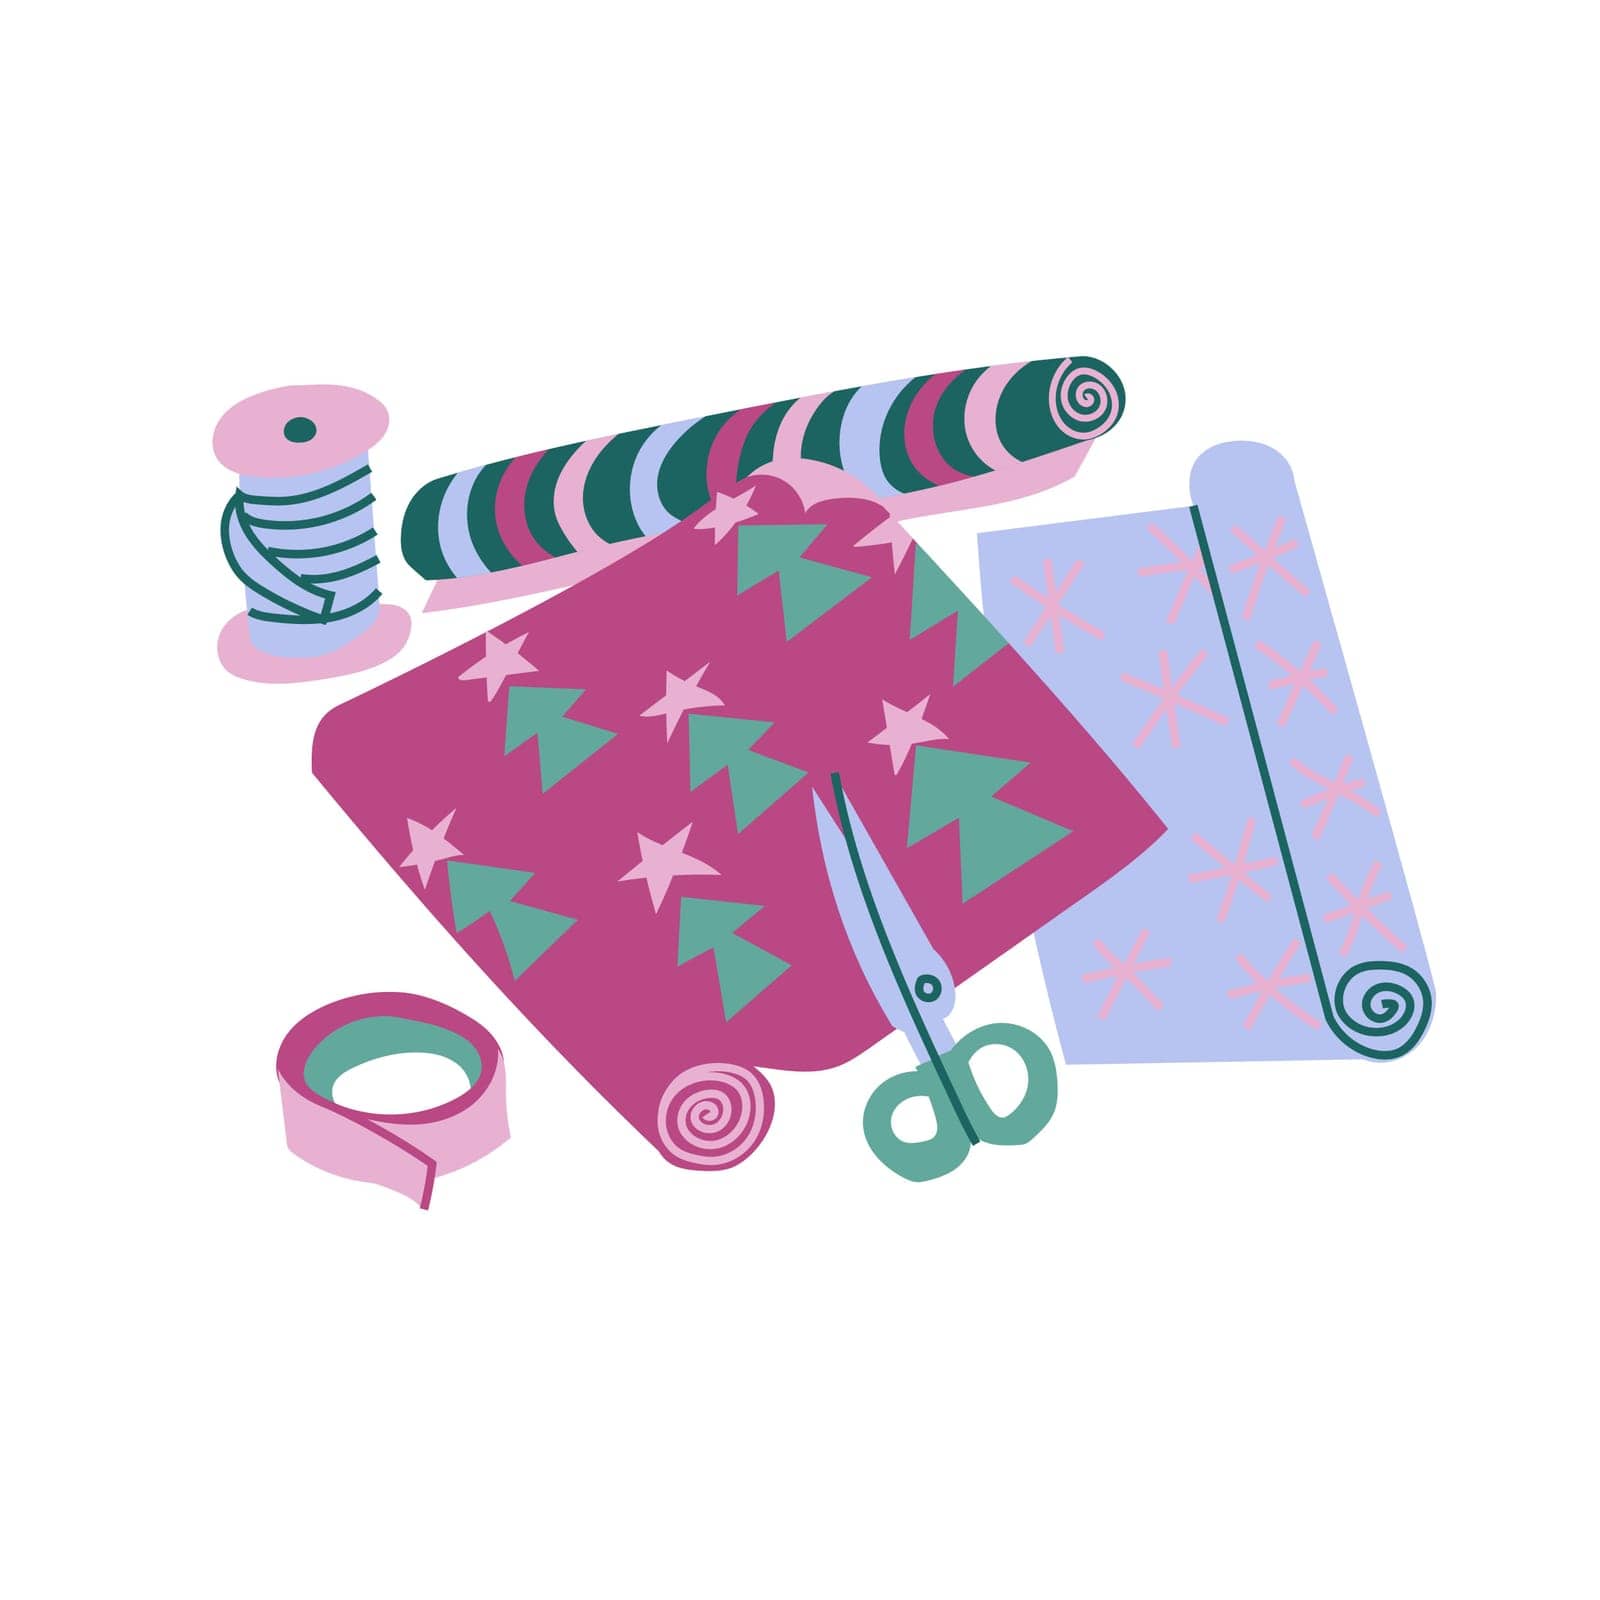 Christmas gift wrapping workplace. A colorful flat illustration of three decorative paper rolls, scissors, ribbon, and tape. Isolated on a white background